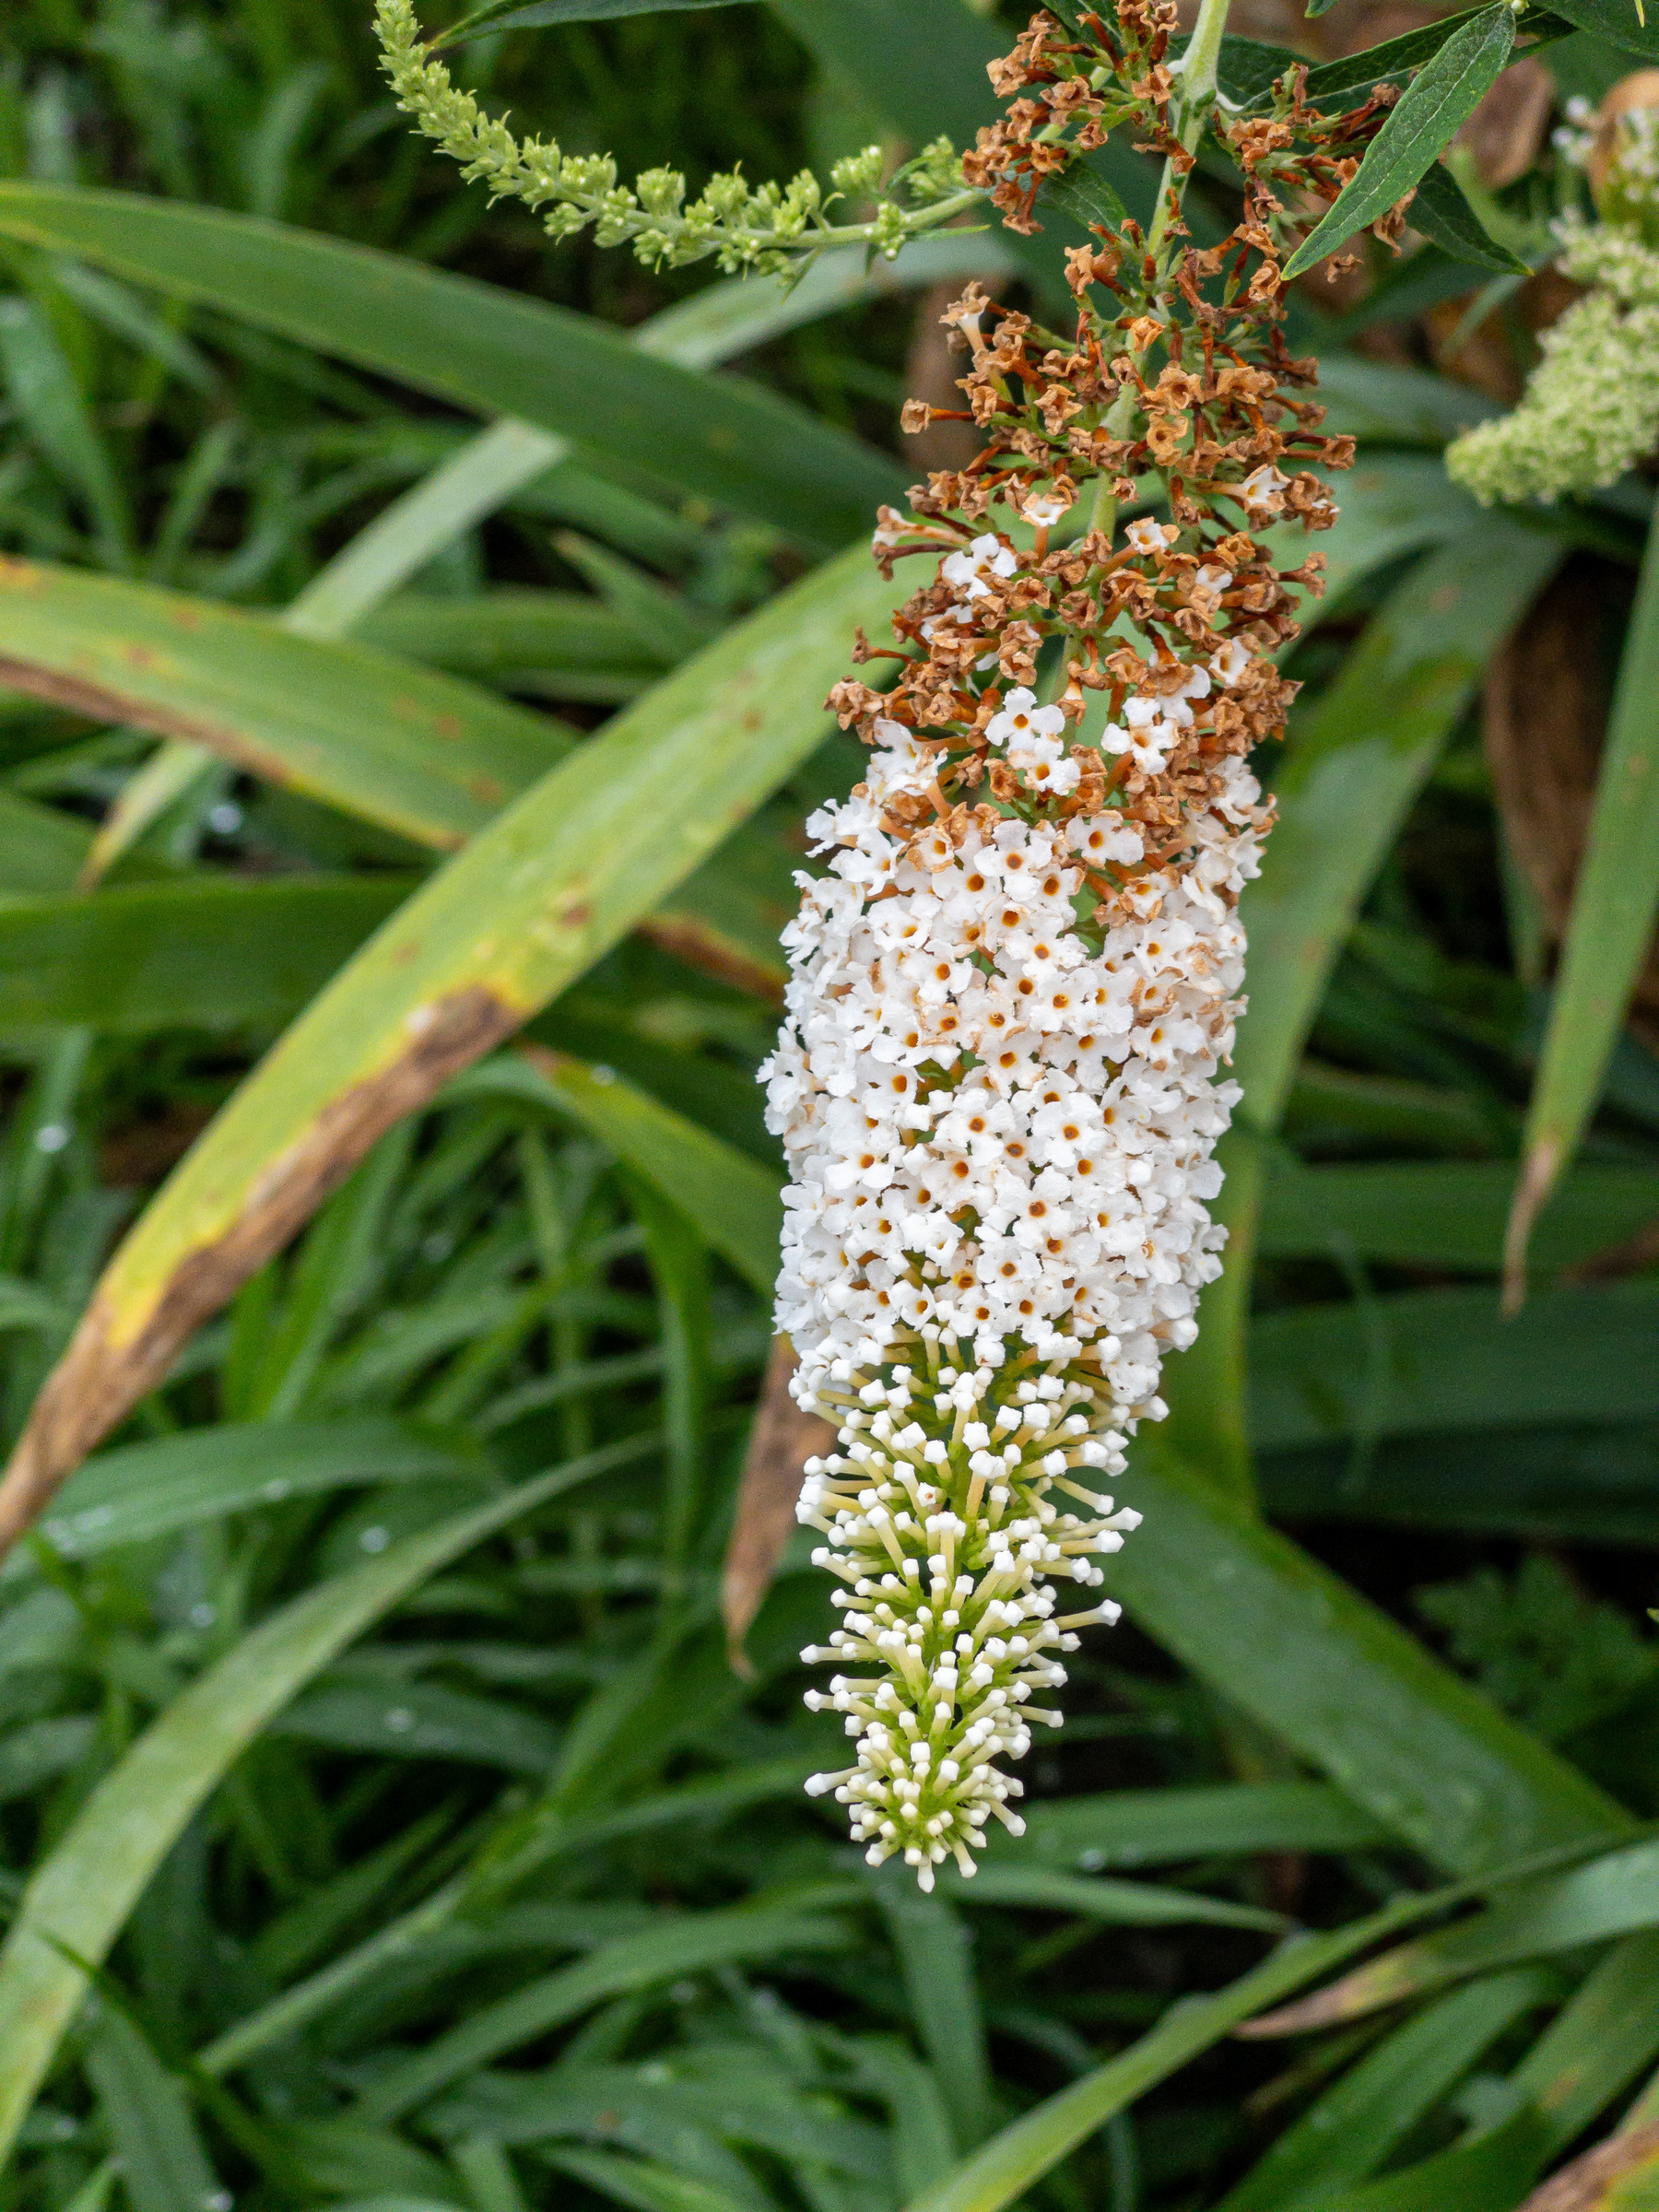 Image of a white flower, pine cone shaped, with hundreds of florets open or opening. Plant foliage in the background.